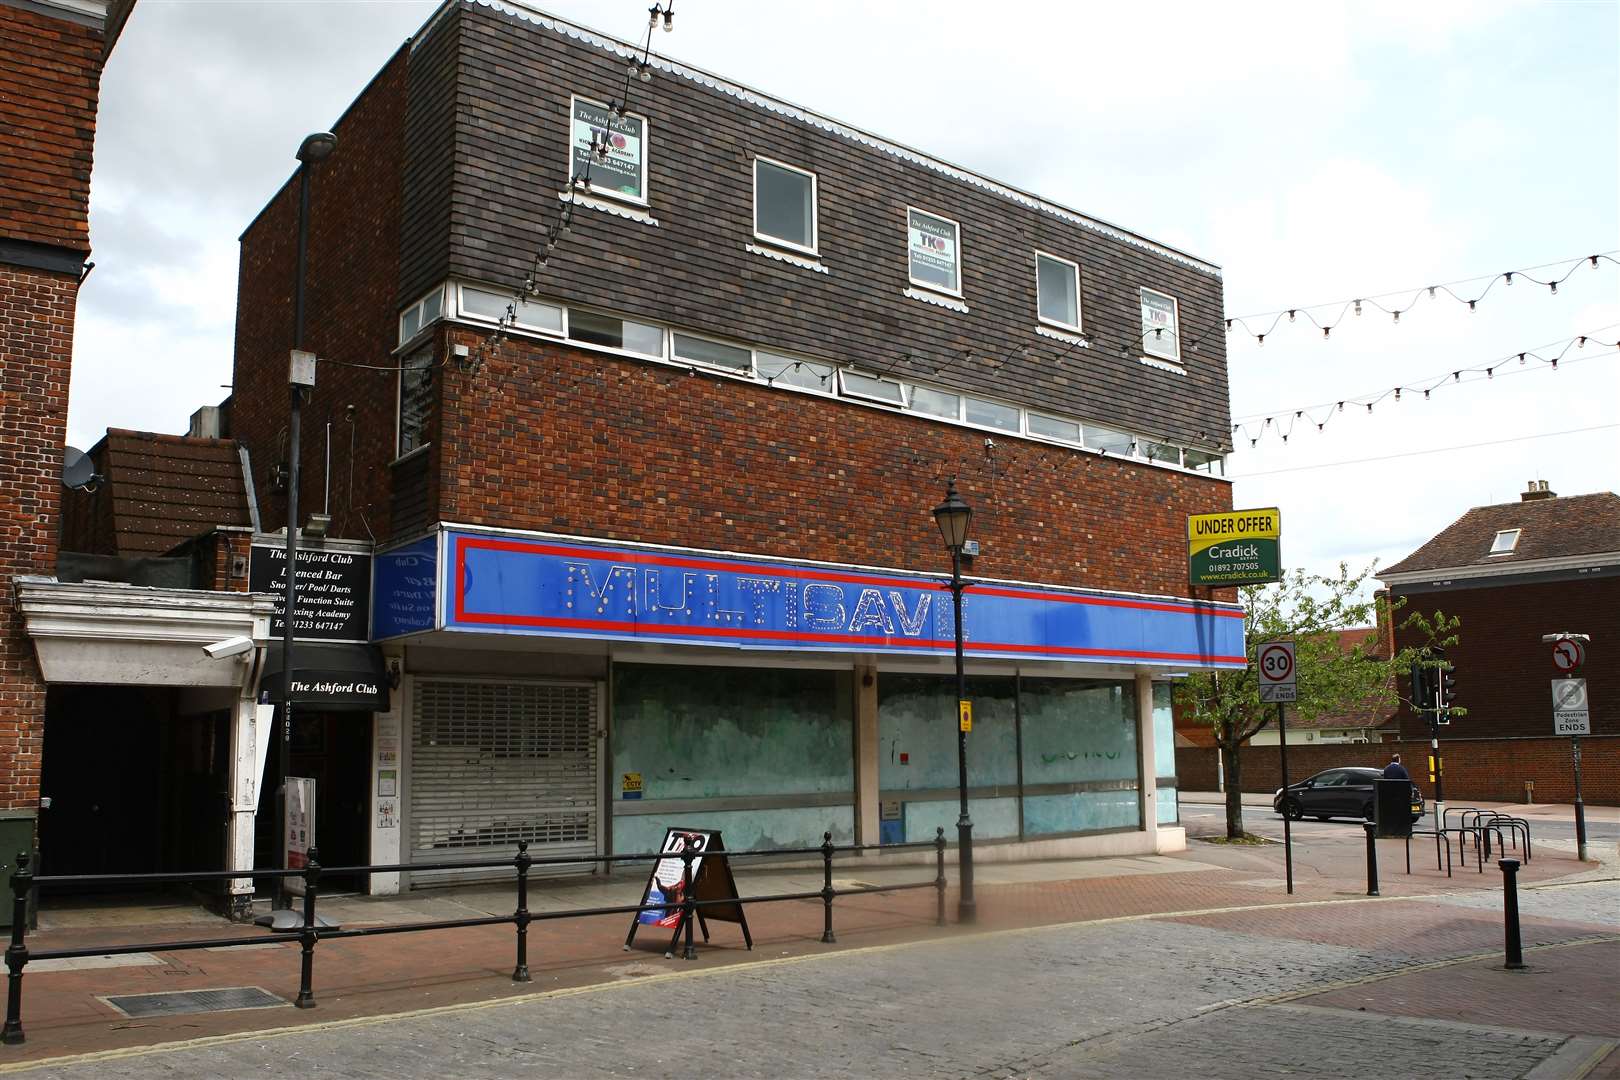 The former Multisave store in the lower High Street, Ashford